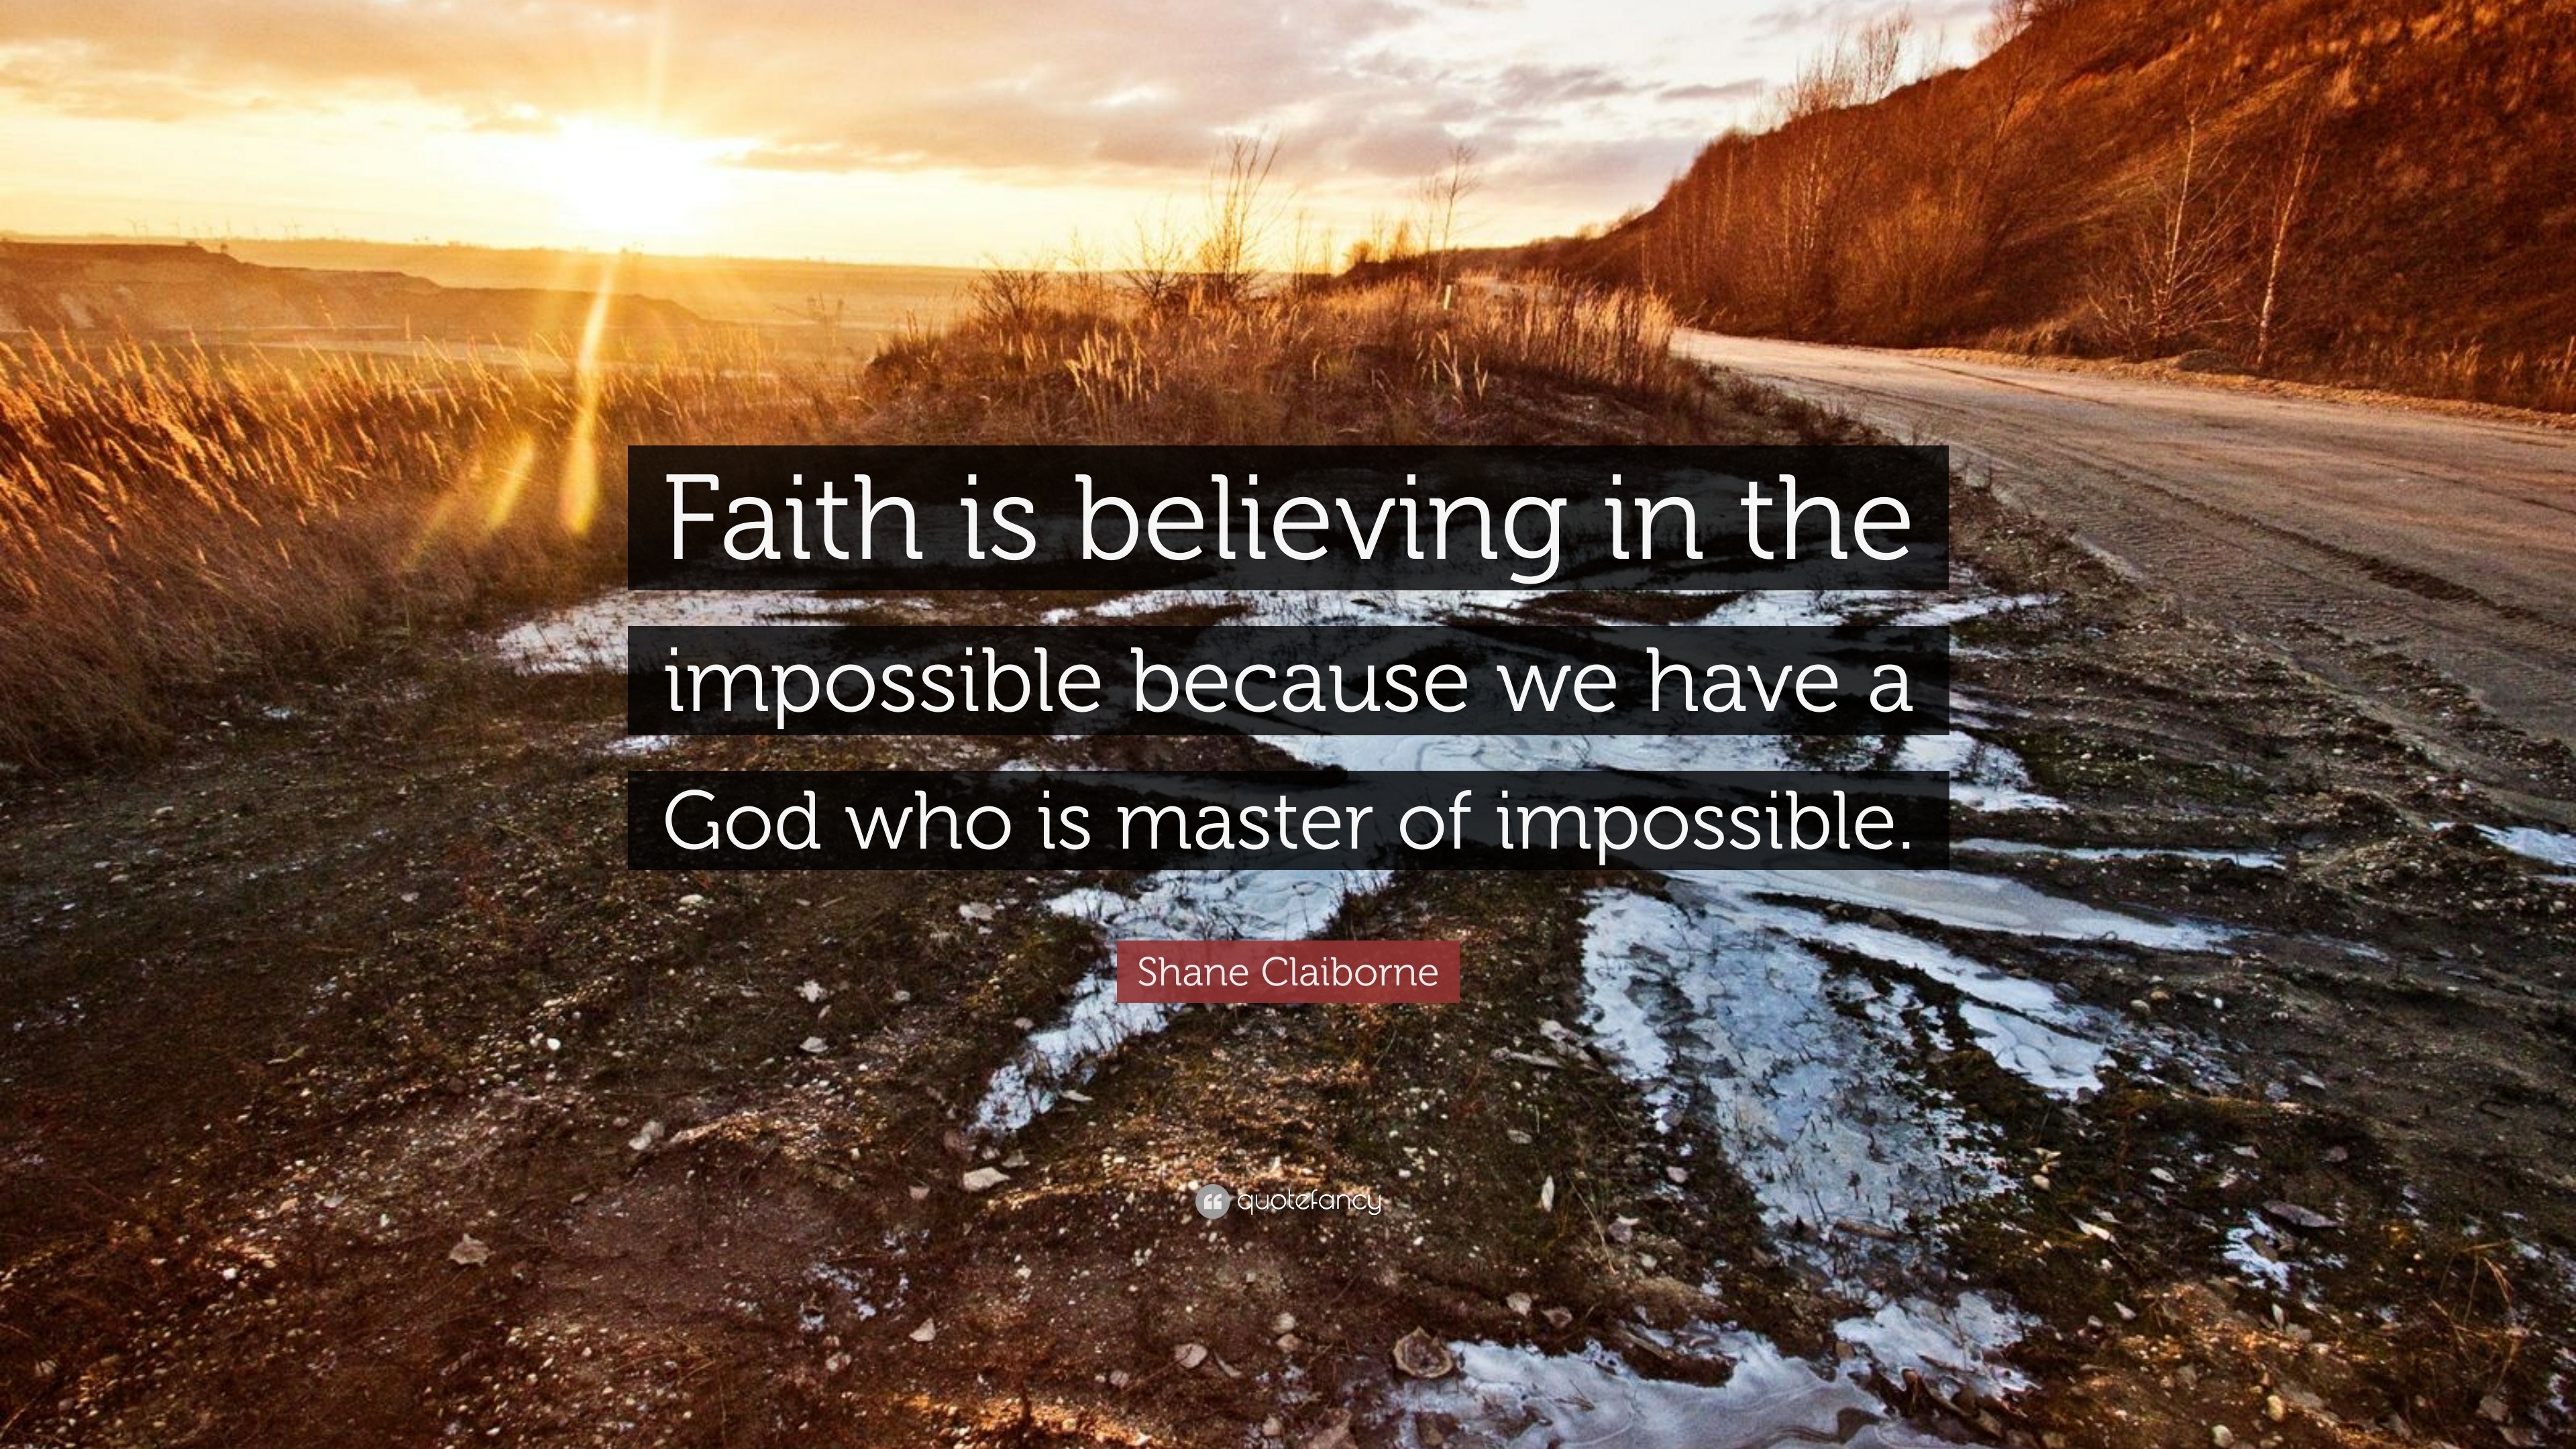 Believing the impossible